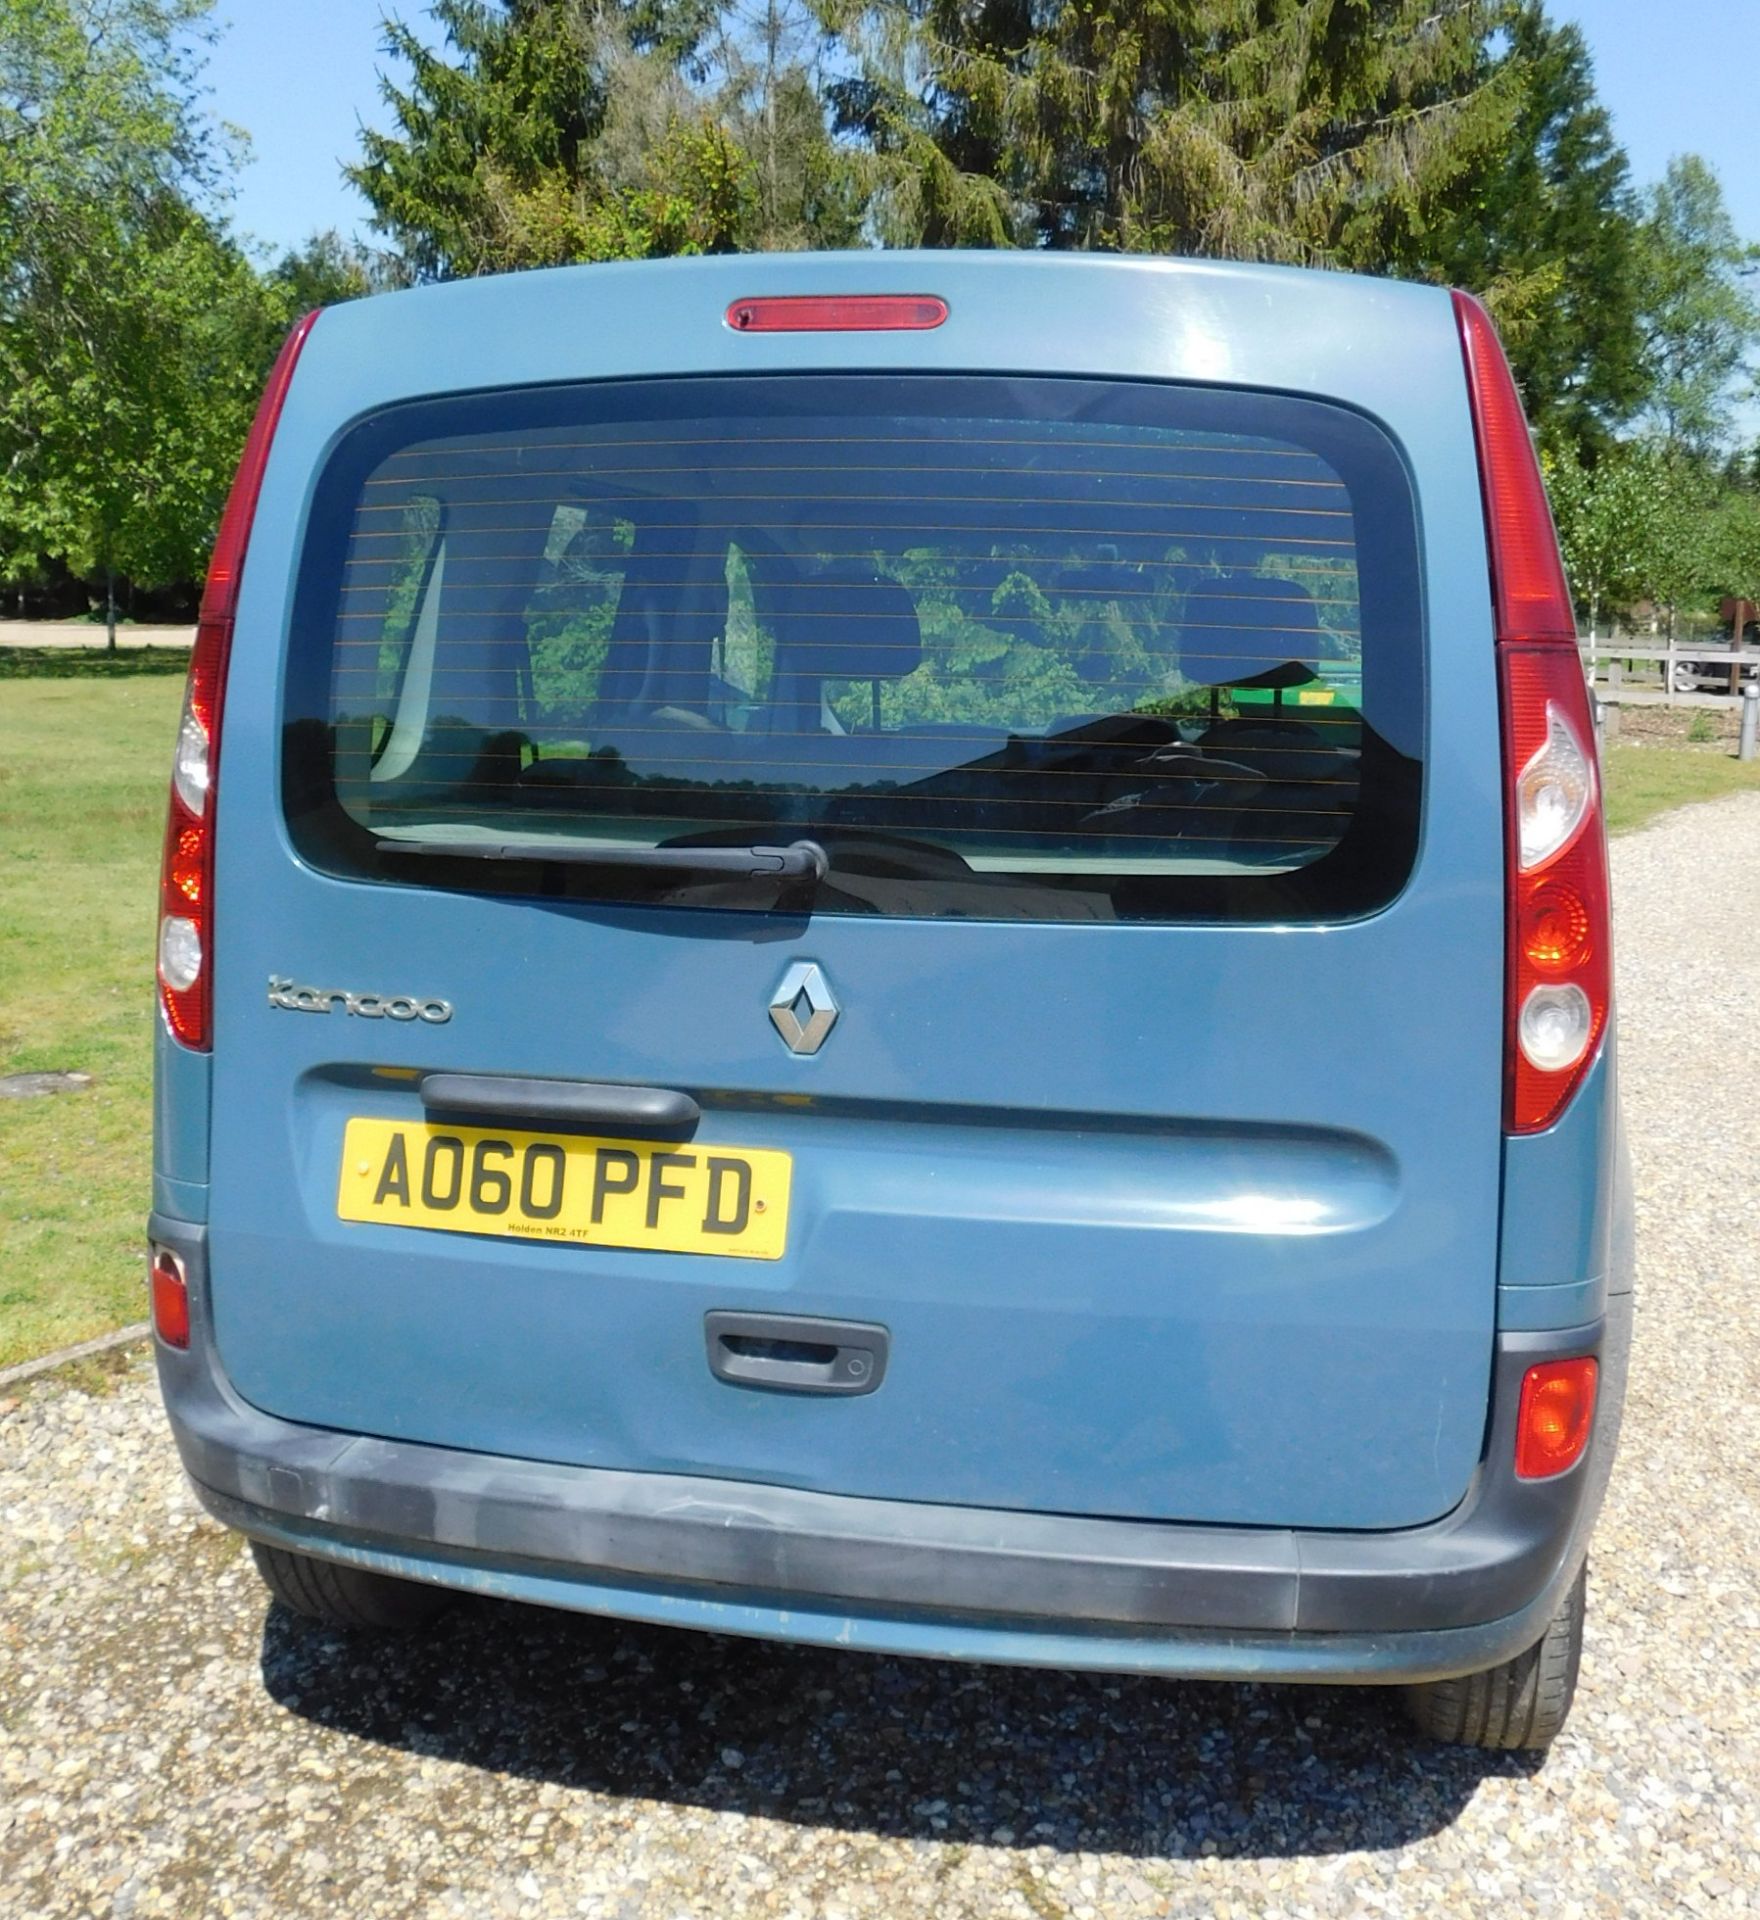 Renault Kangoo 1.45 DCi 110 Expression, Registration AO60 PFD, First Registered 26th November - Image 9 of 23